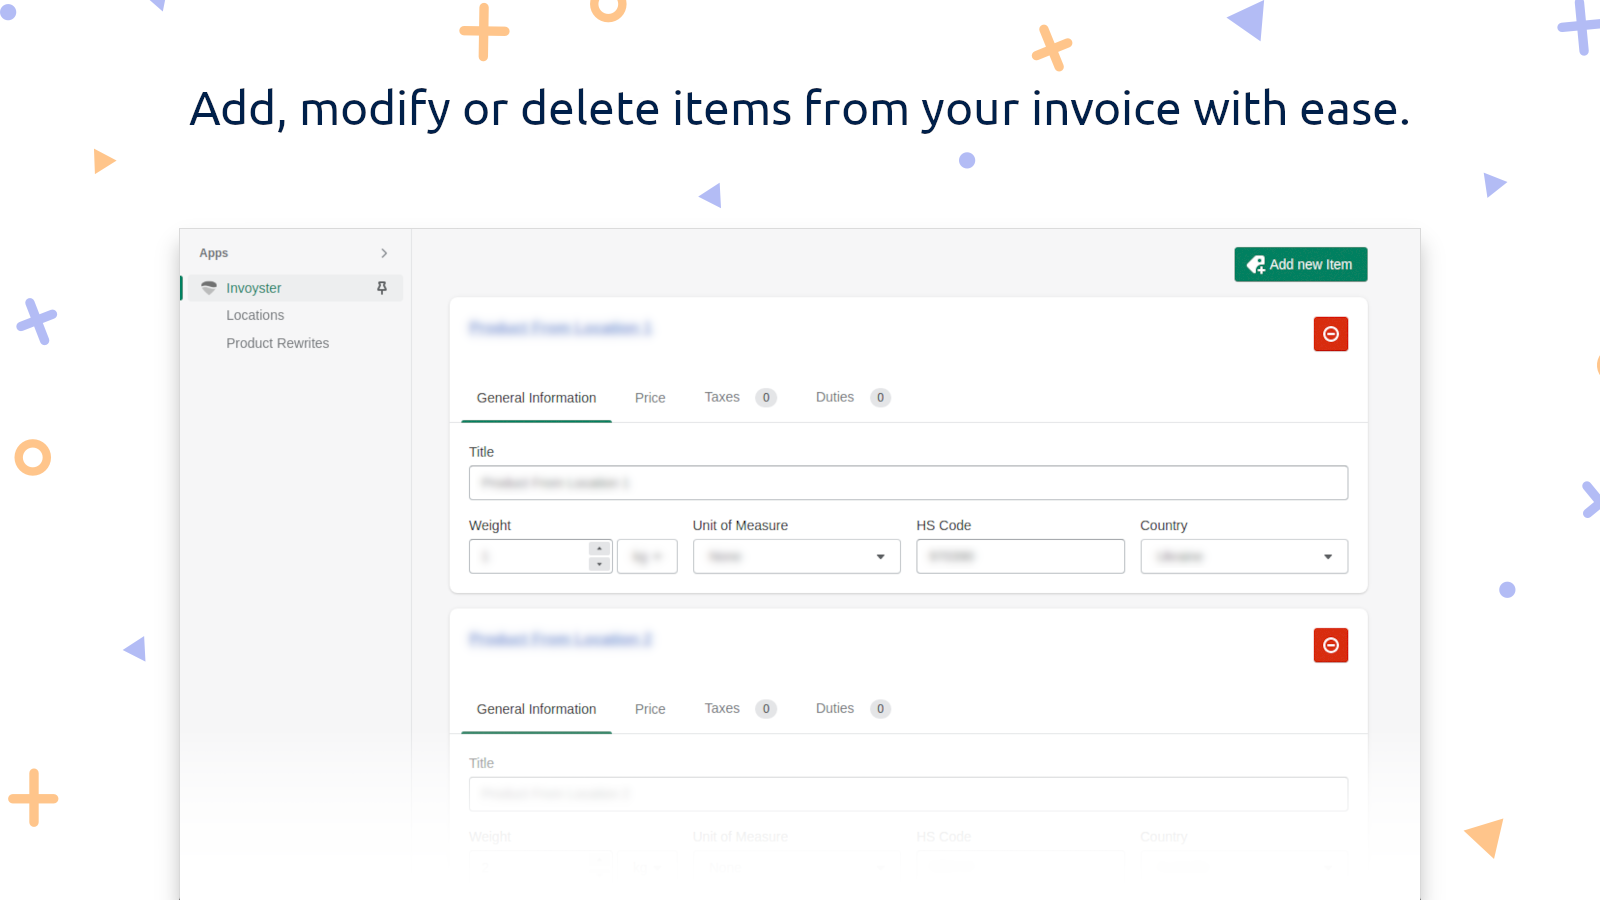 Add, modify or delete items from your invoice with ease